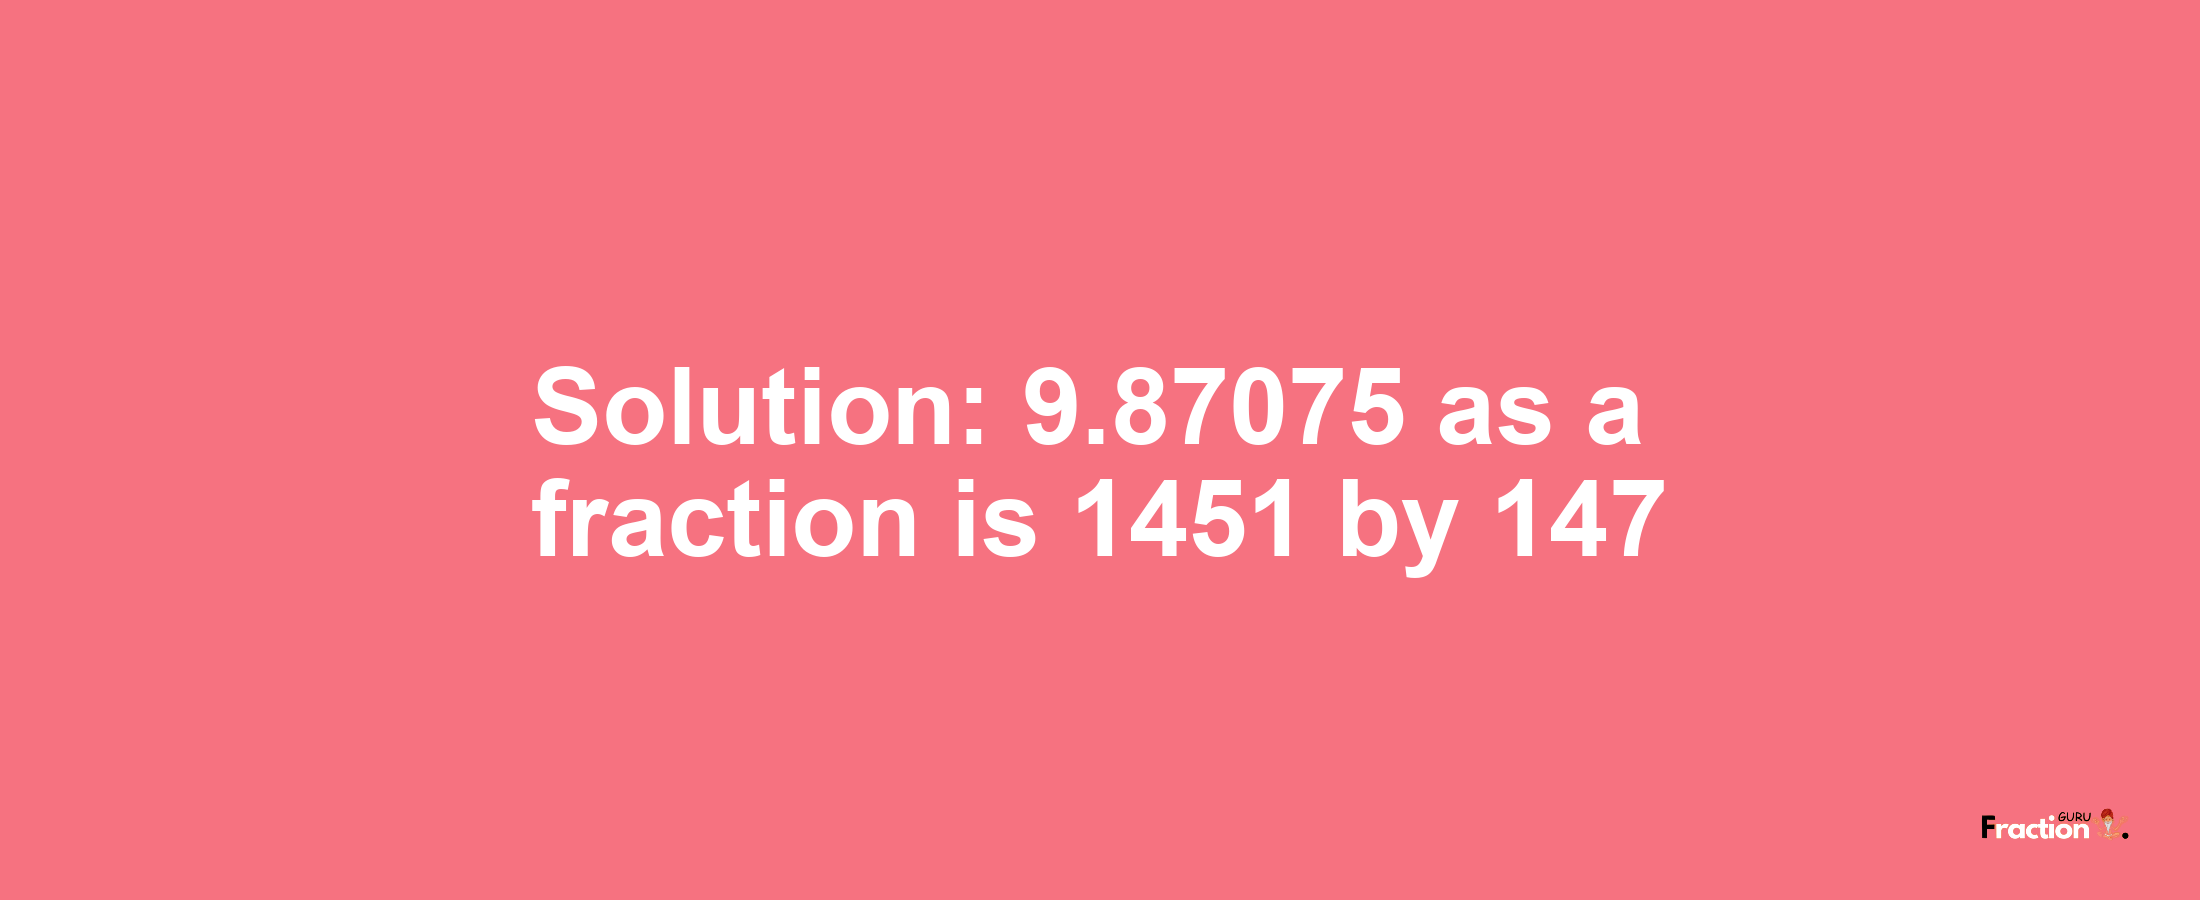 Solution:9.87075 as a fraction is 1451/147